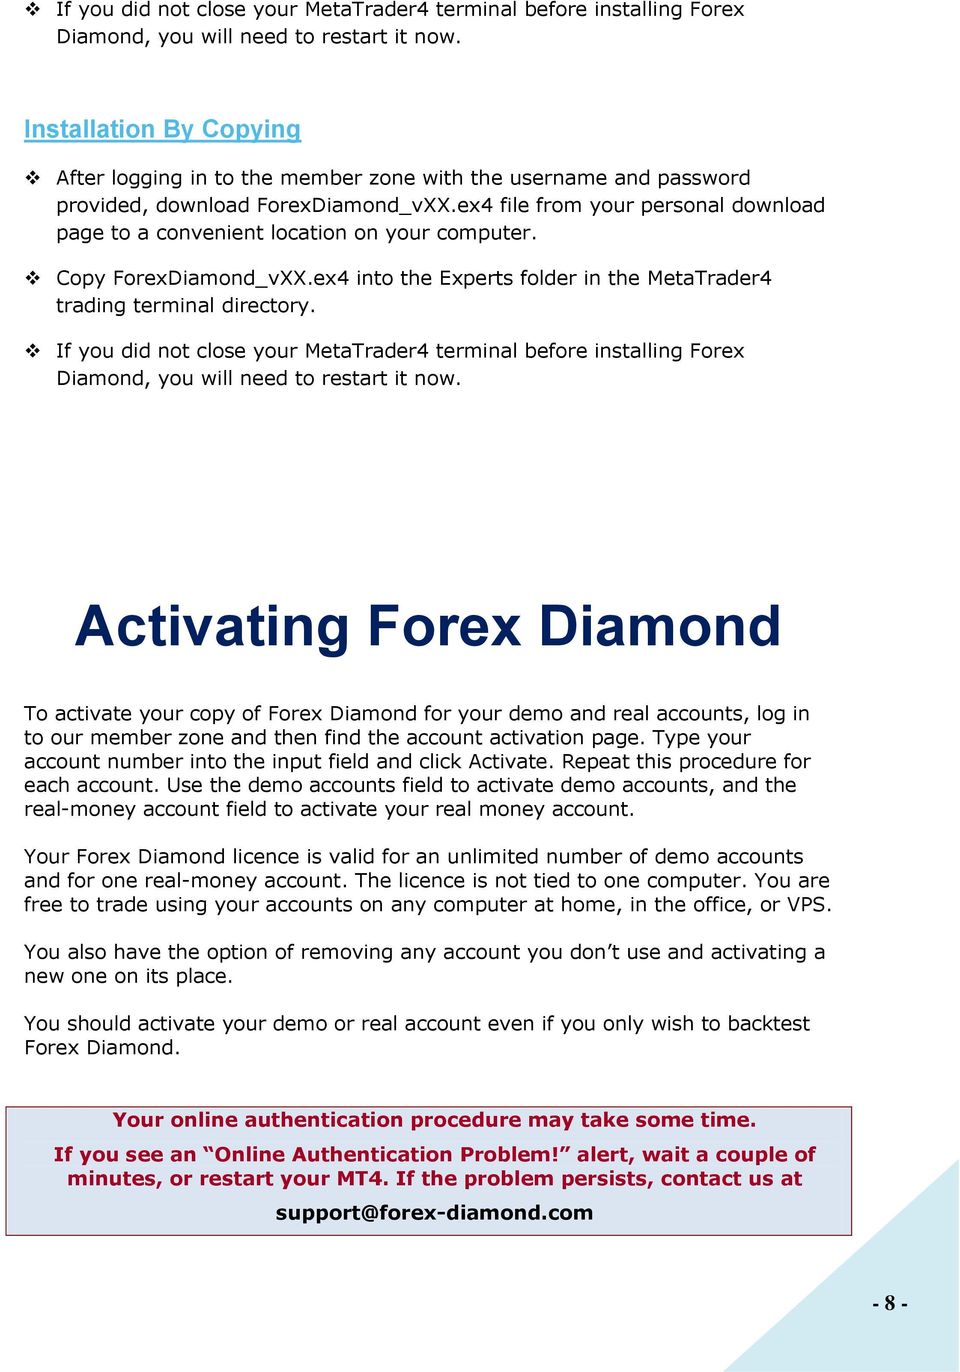 ex4 file from your personal download page to a convenient location on your computer. Copy ForexDiamond_vXX.ex4 into the Experts folder in the MetaTrader4 trading terminal directory.